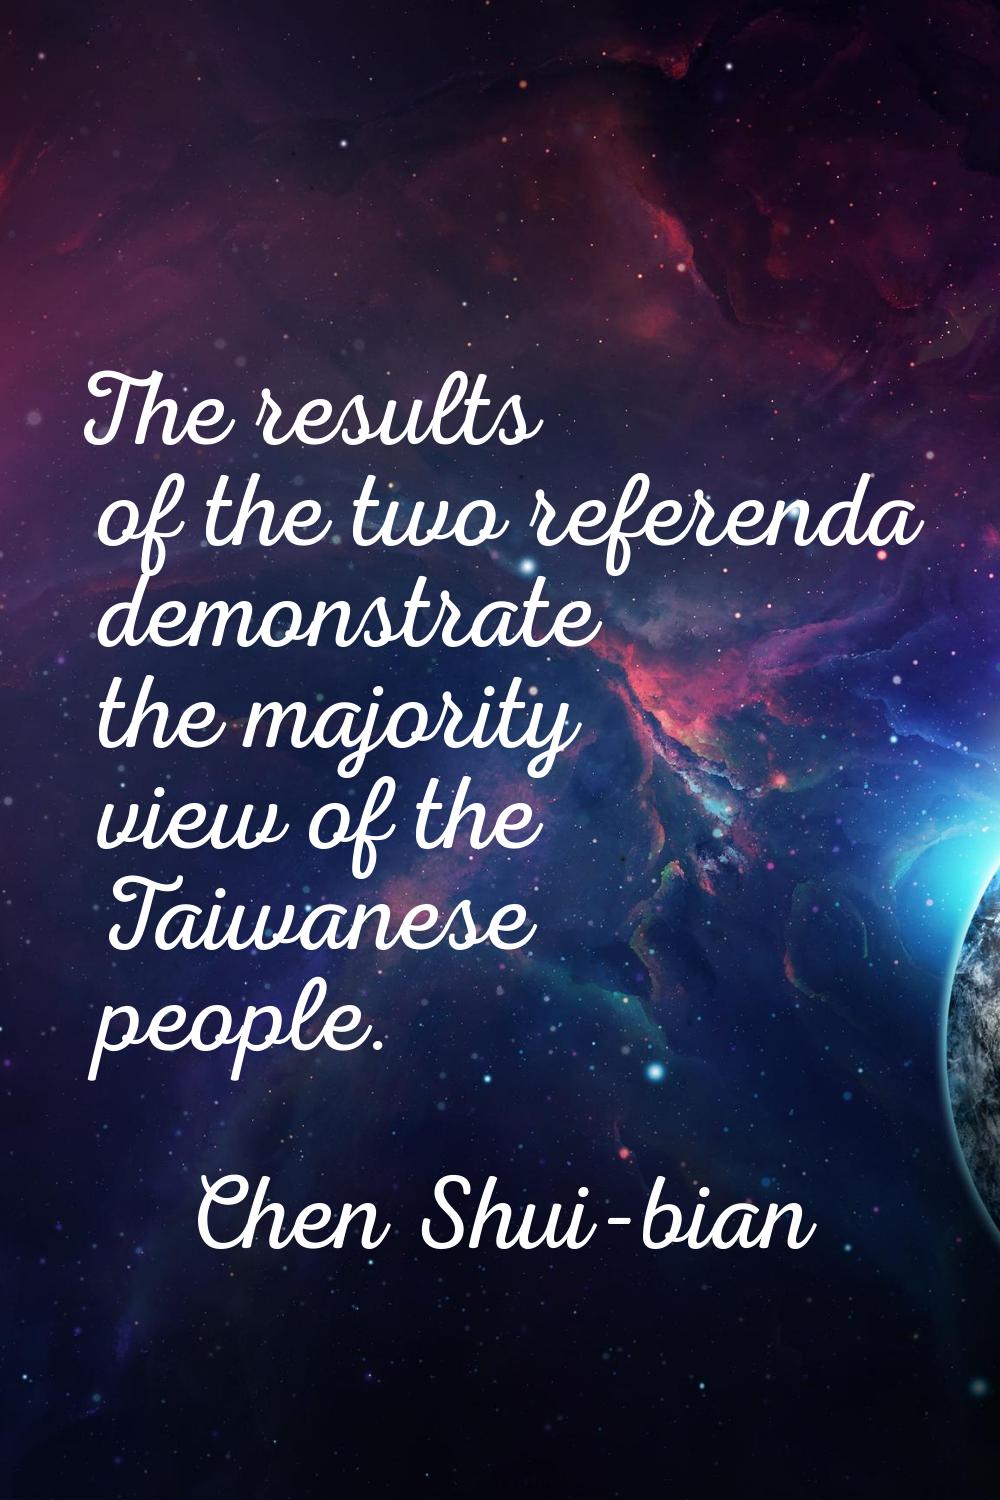 The results of the two referenda demonstrate the majority view of the Taiwanese people.